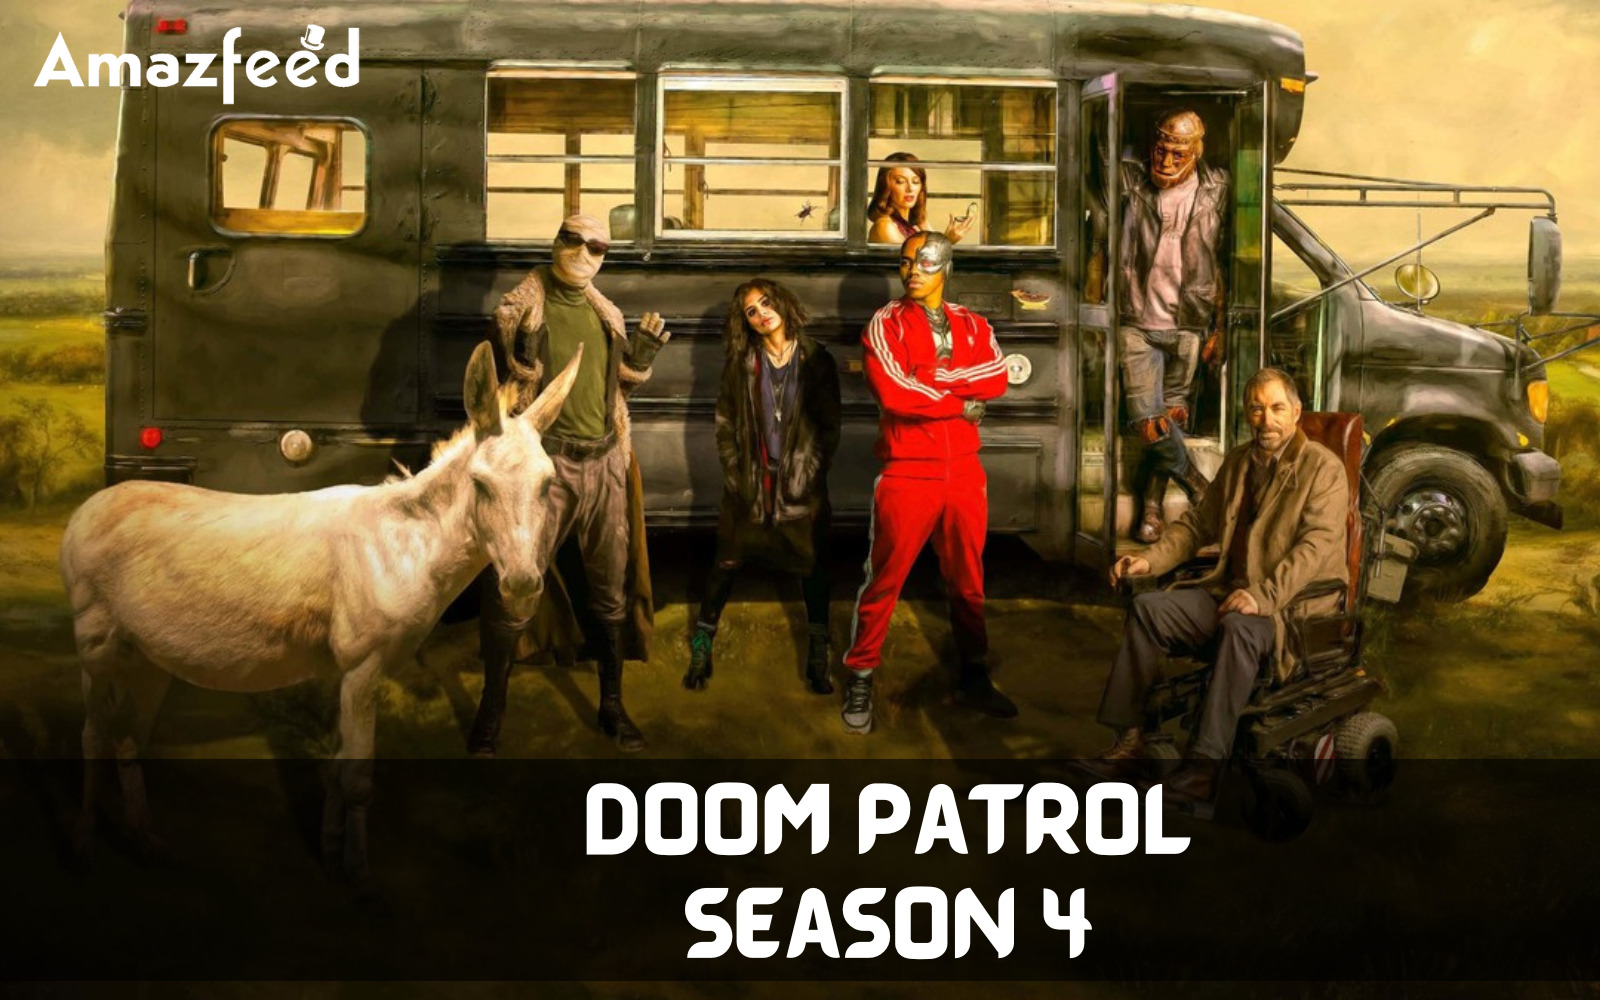 What can we expect from Doom Patrol season 4